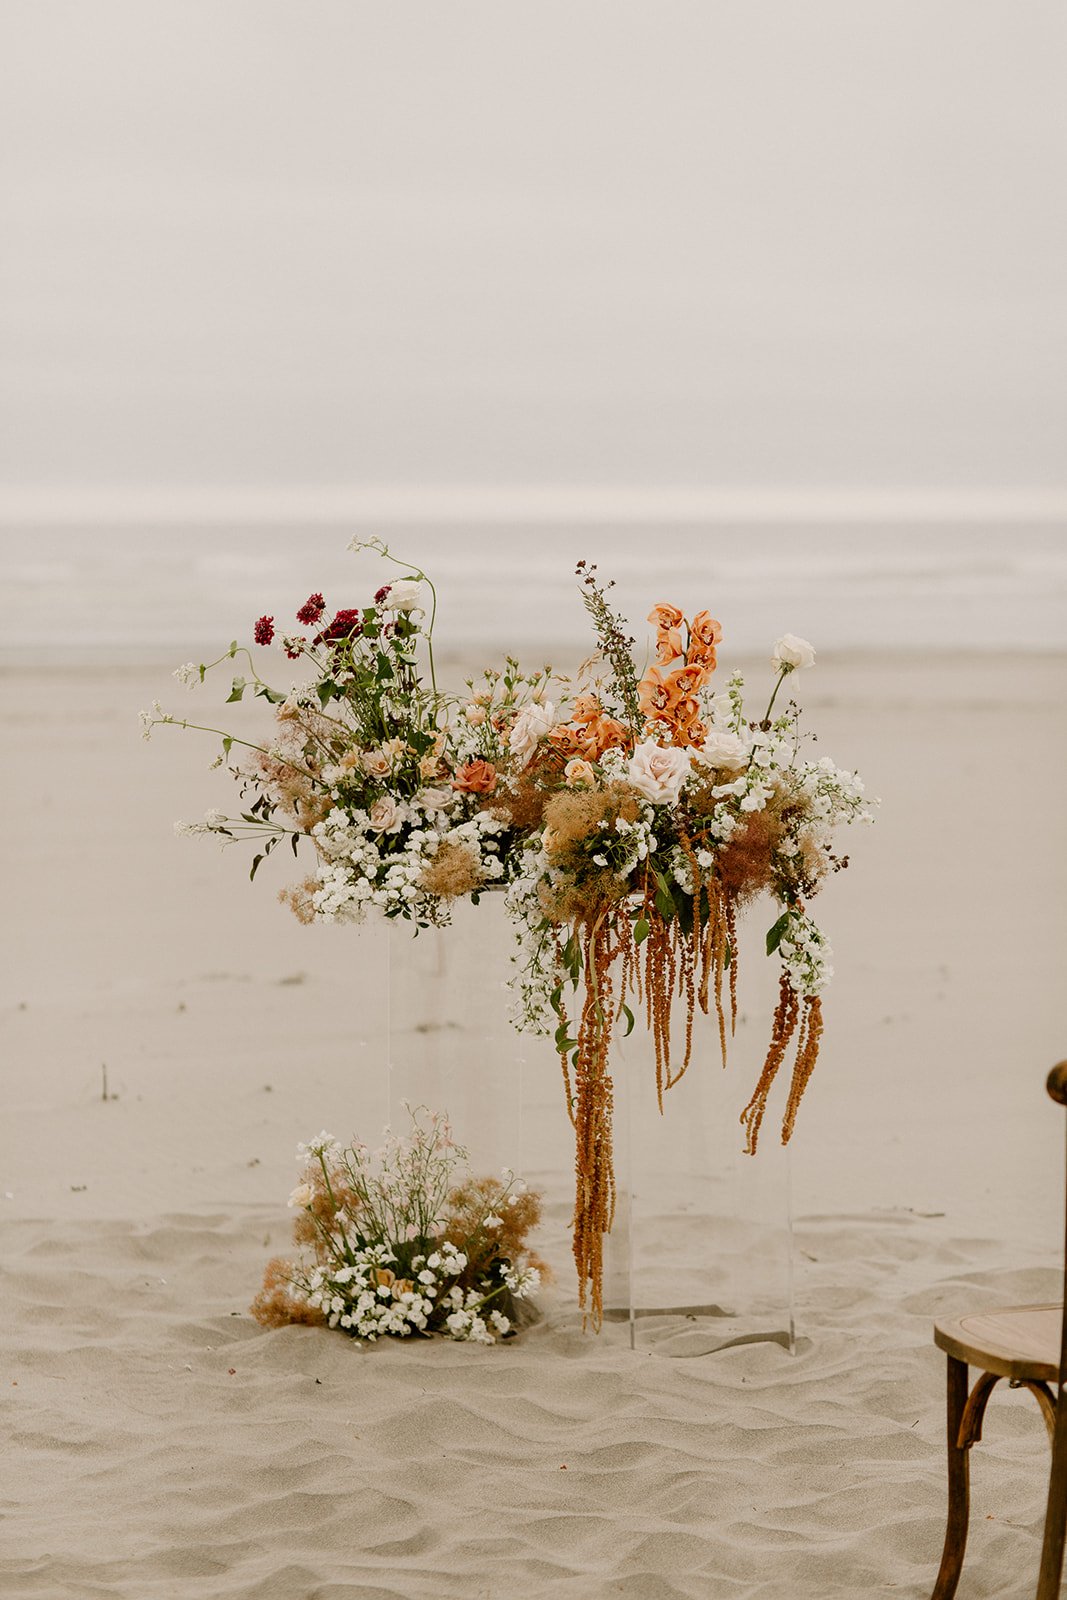 close-up of the floral arrangements at the wedding ceremony during a coastal washington wedding